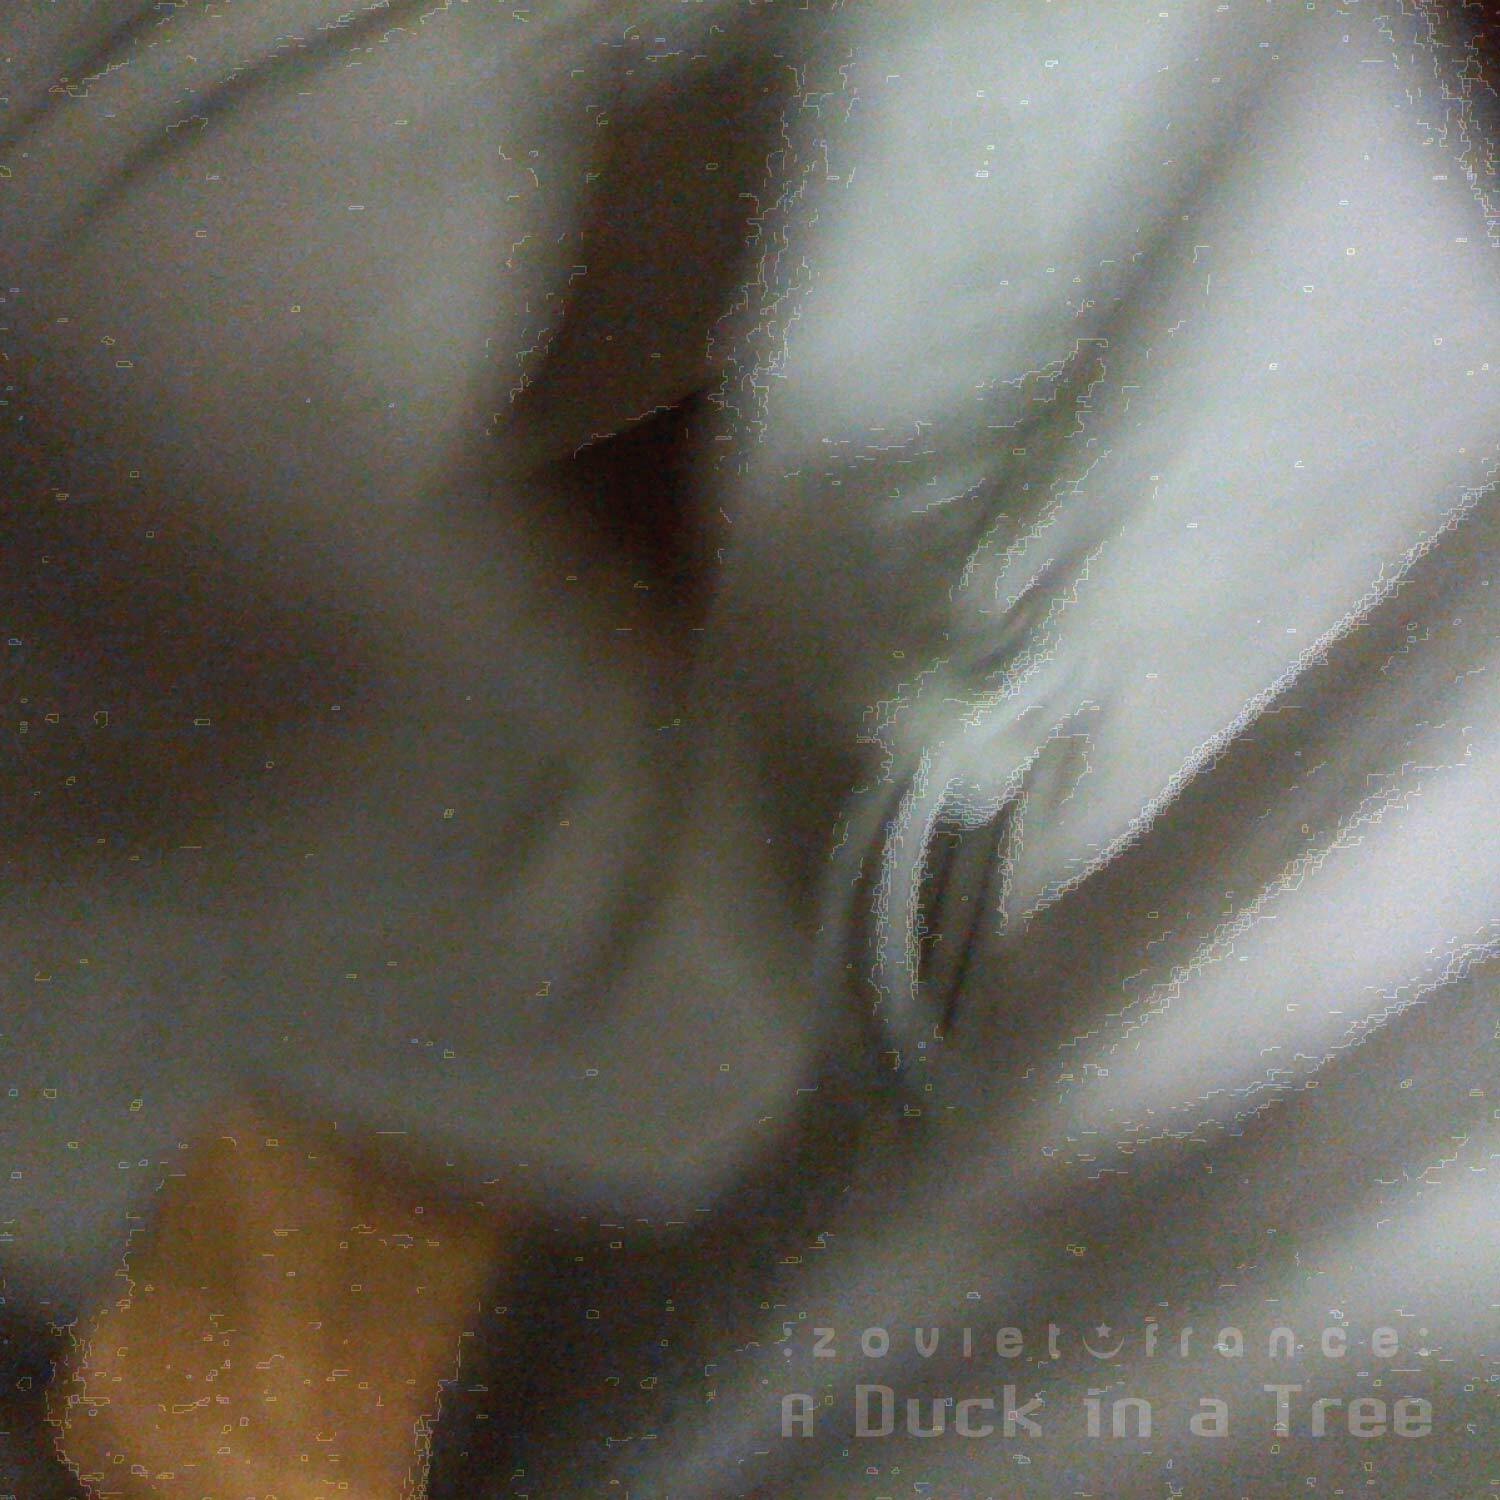 A-Duck-in-a-Tree-2019-05-11-_-Sphagnum-in-the-Magic-Room-cover-1500.jpg